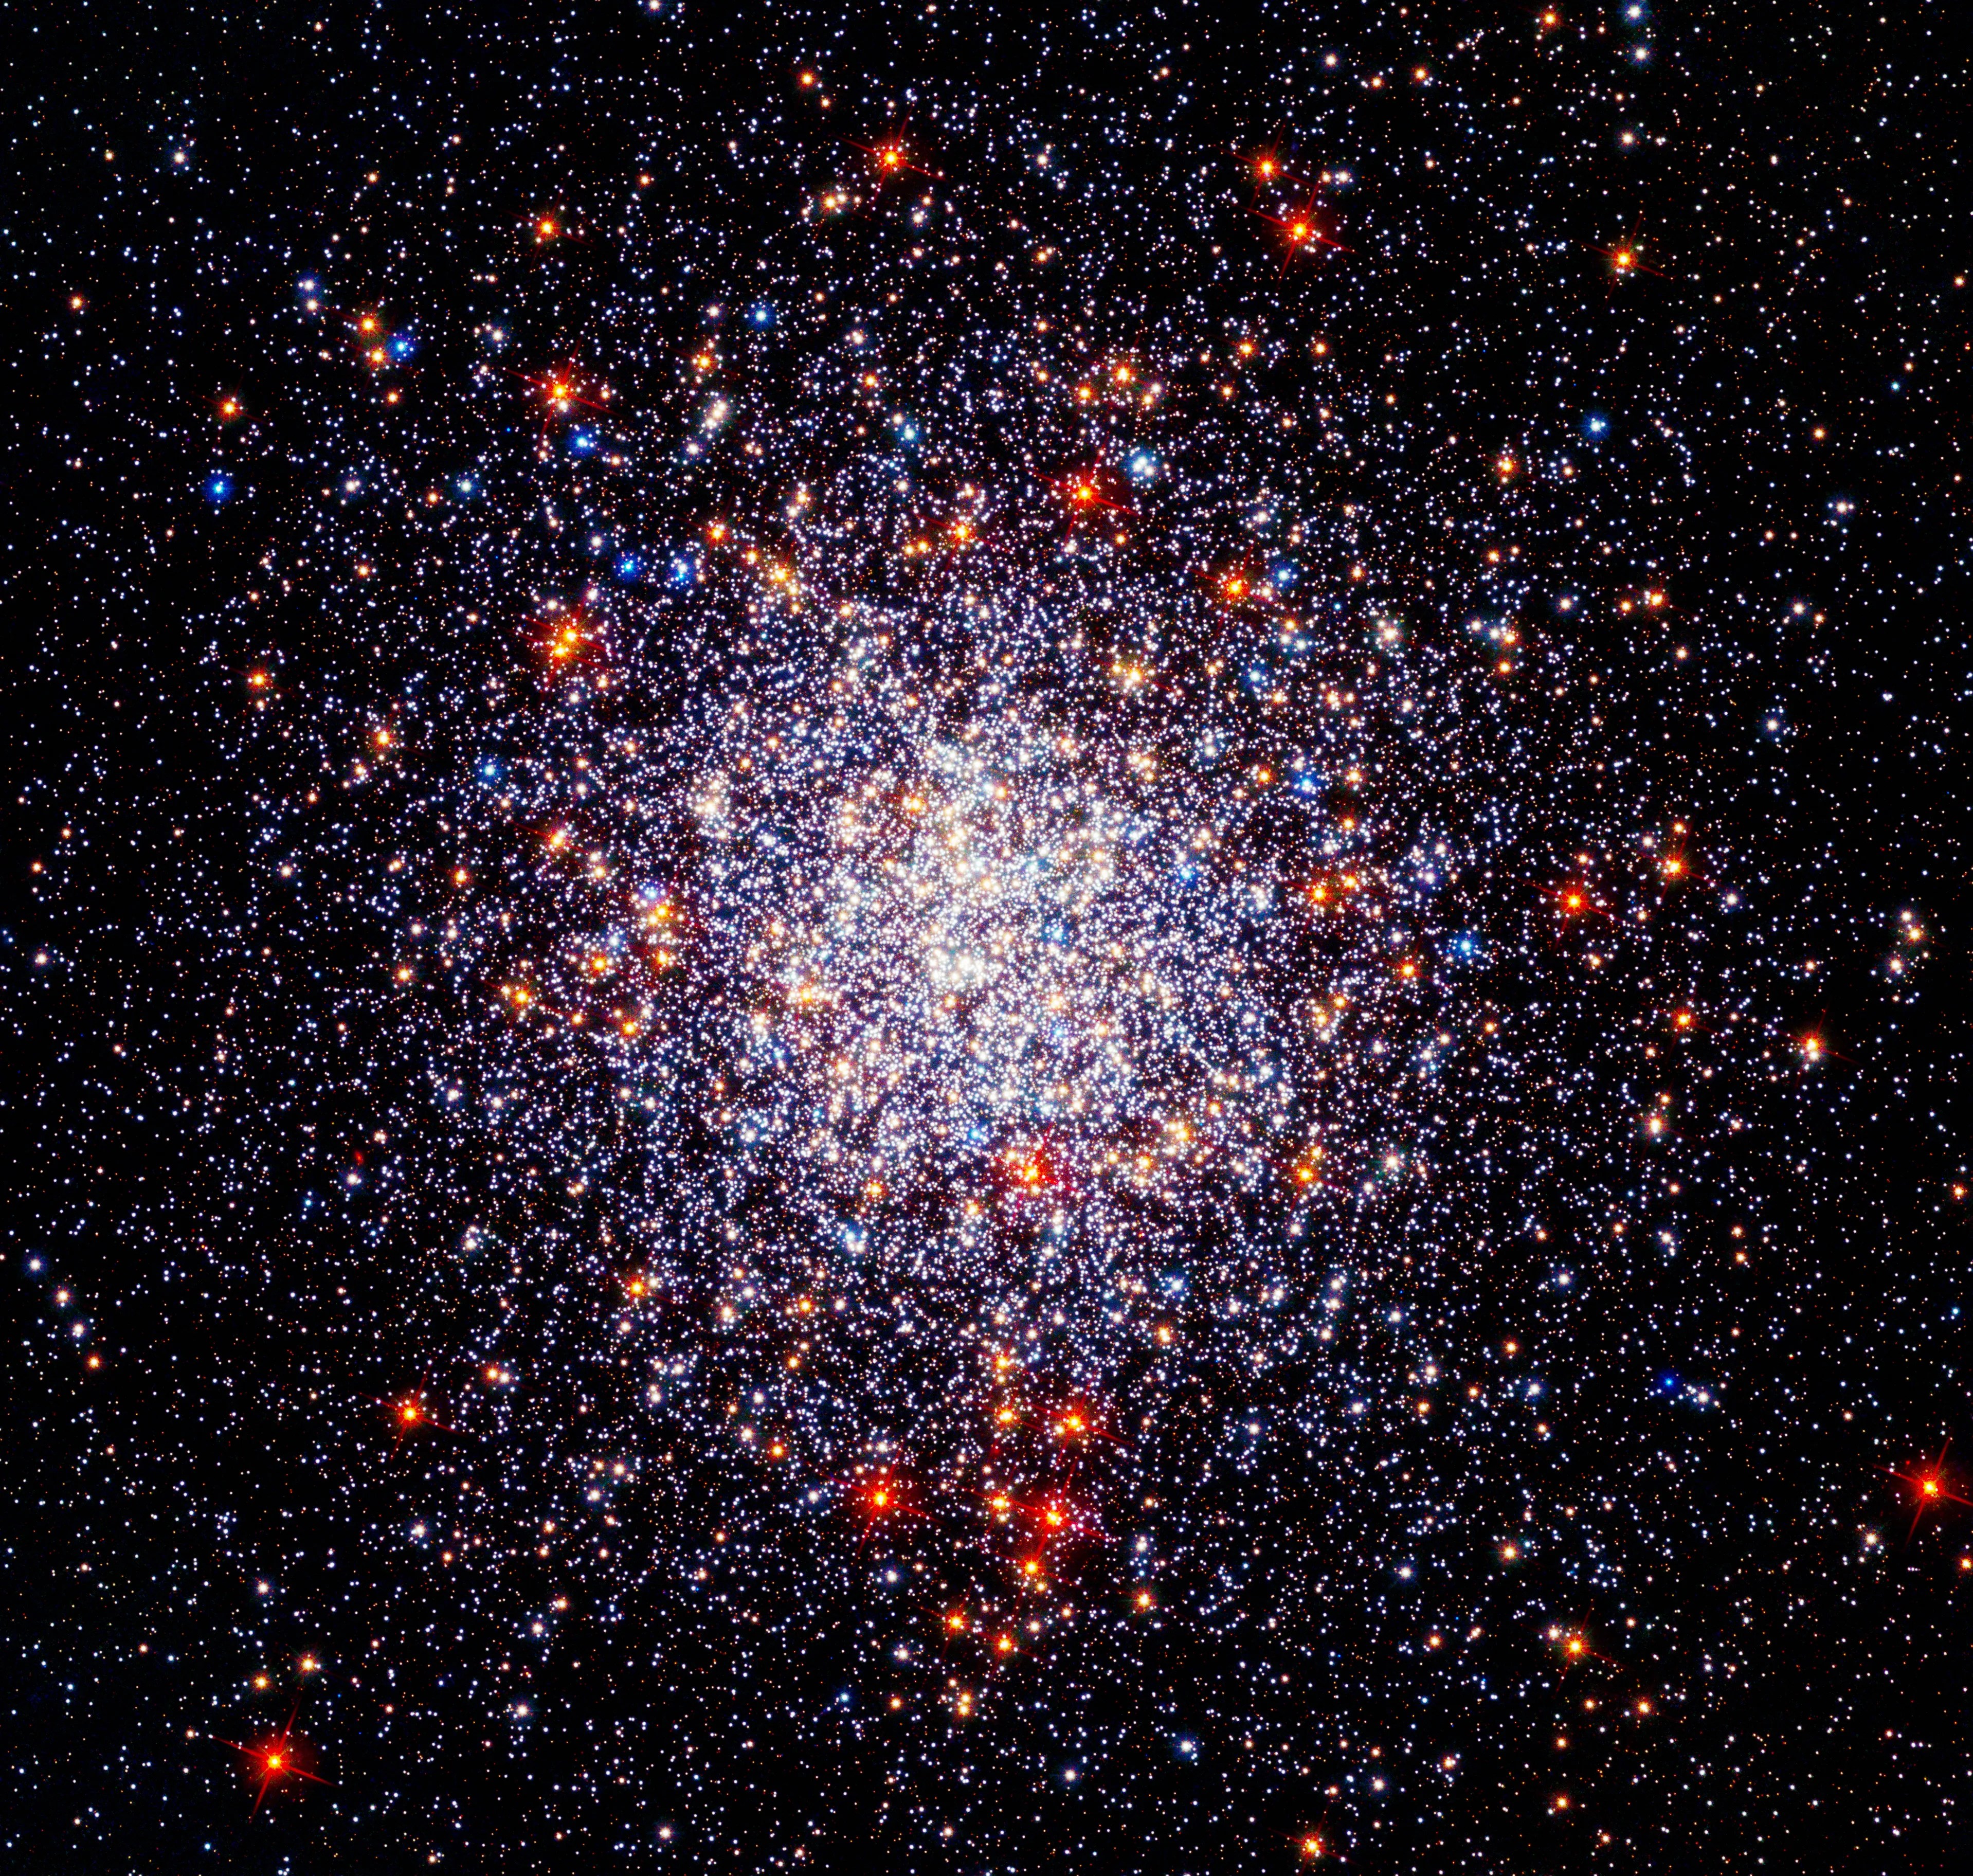 A spherical cluster of bright white, red, and blue stars.